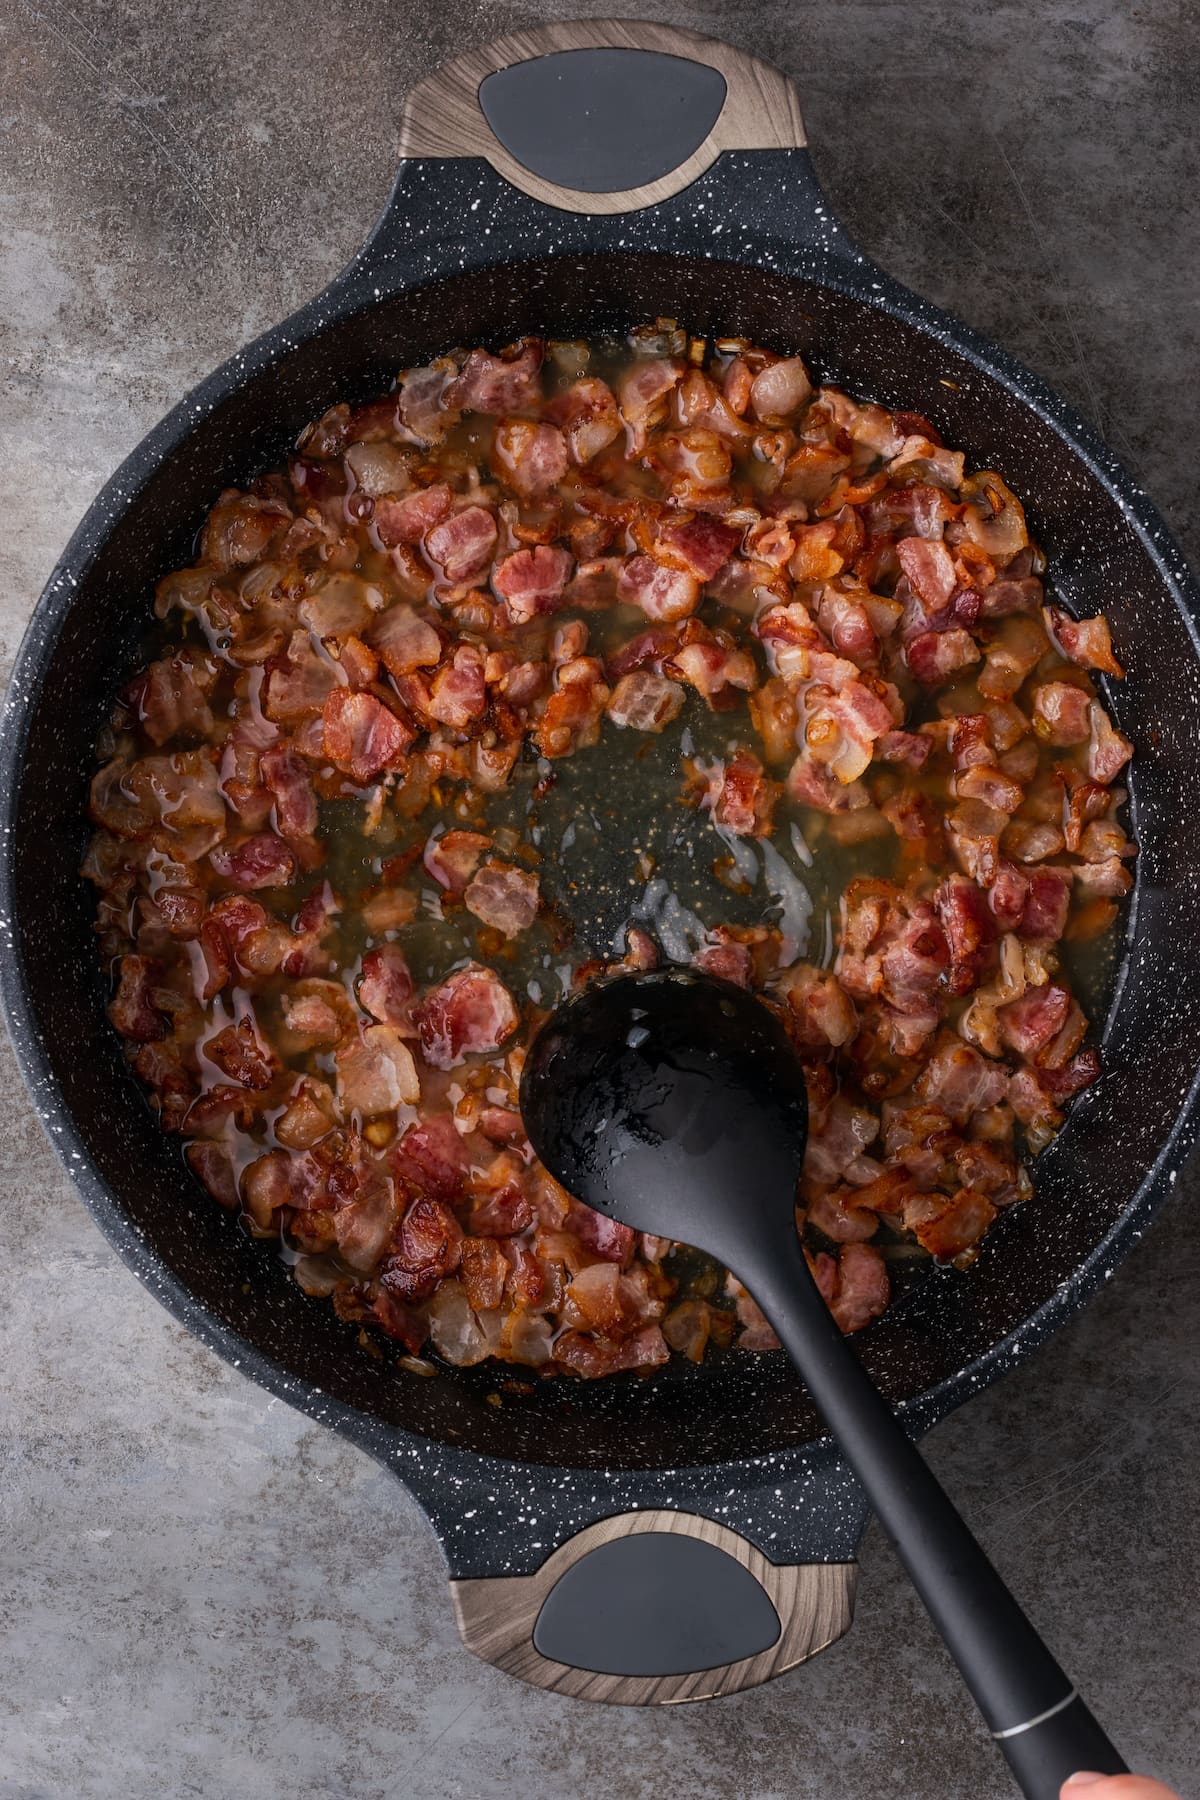 A plastic spoon scrapes the bottom of a pan filled with caramelized onions and bacon, deglazed with broth and white wine.